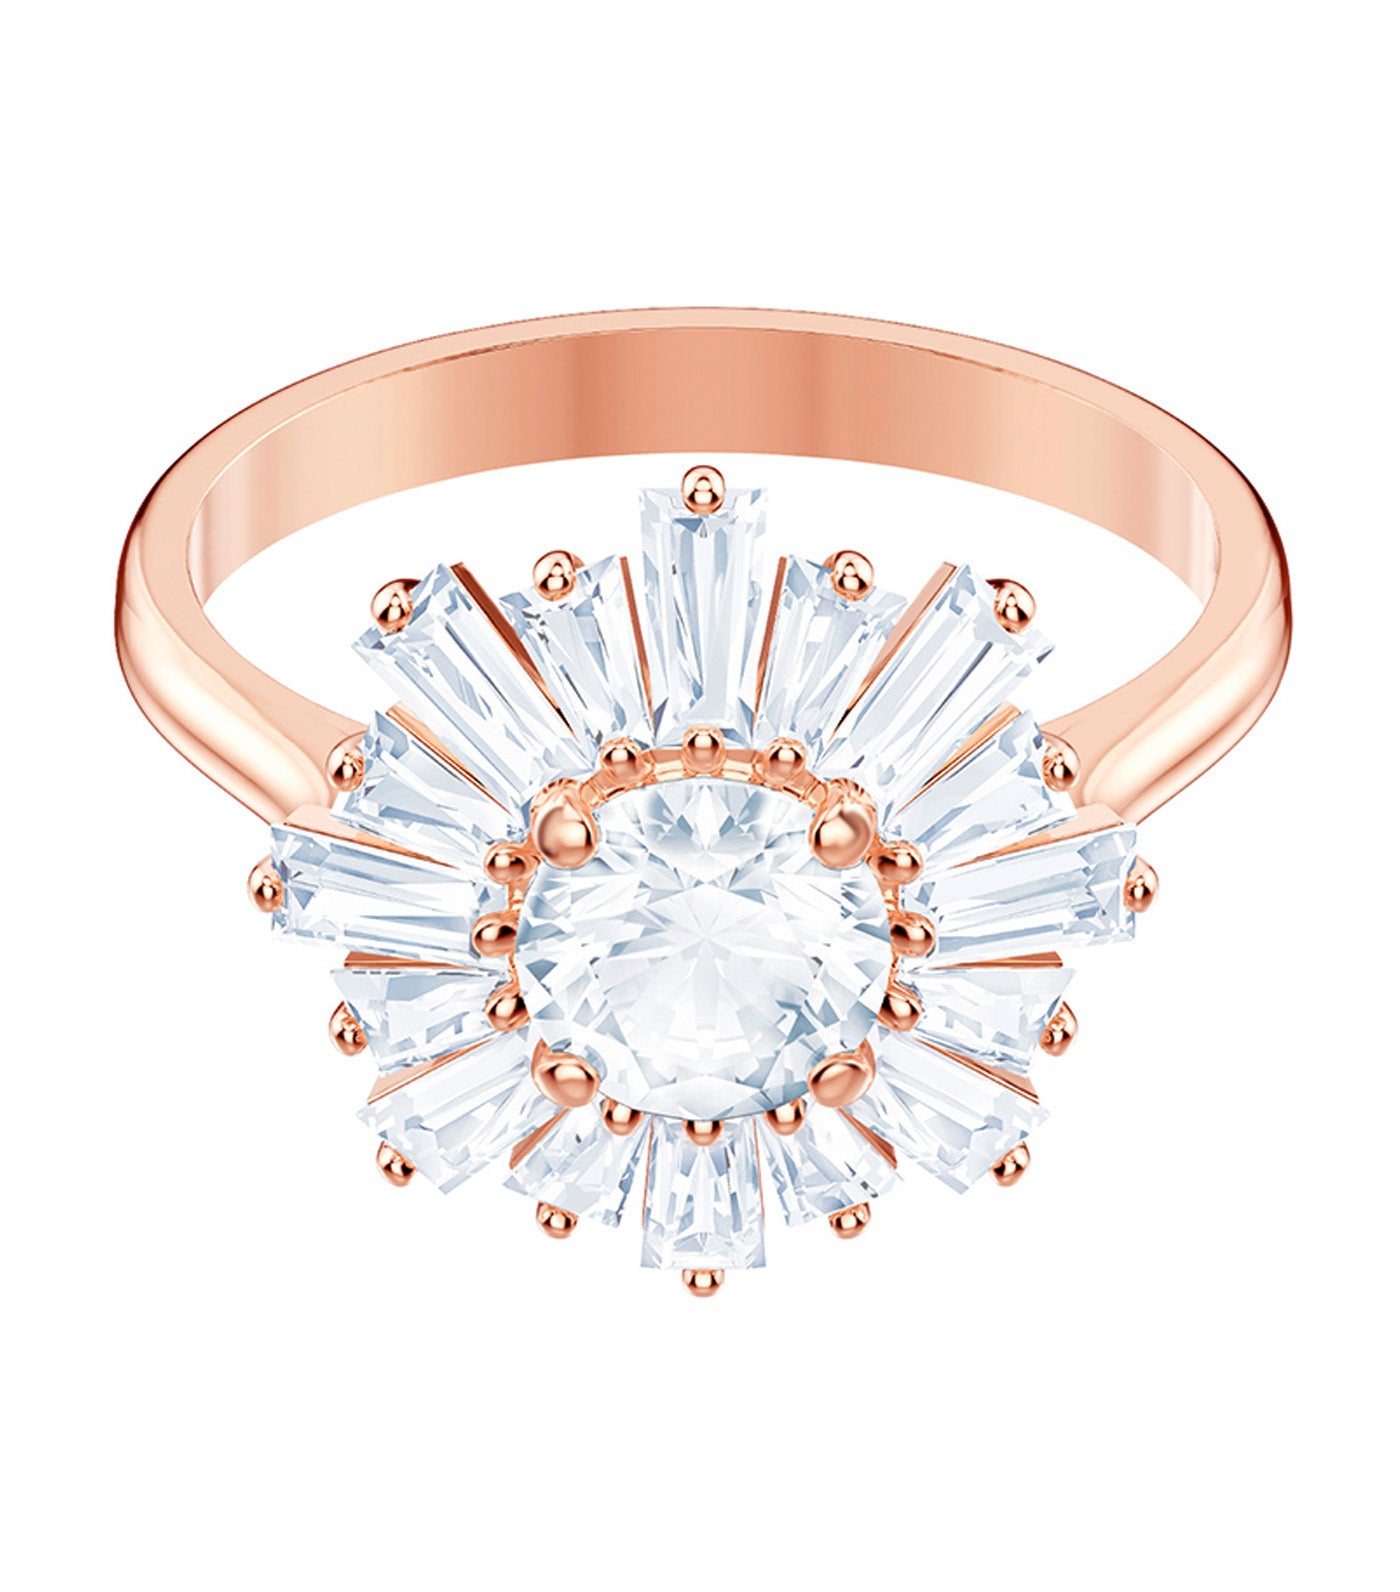 Sunshine Ring White Rose-Gold Tone Plated Pink